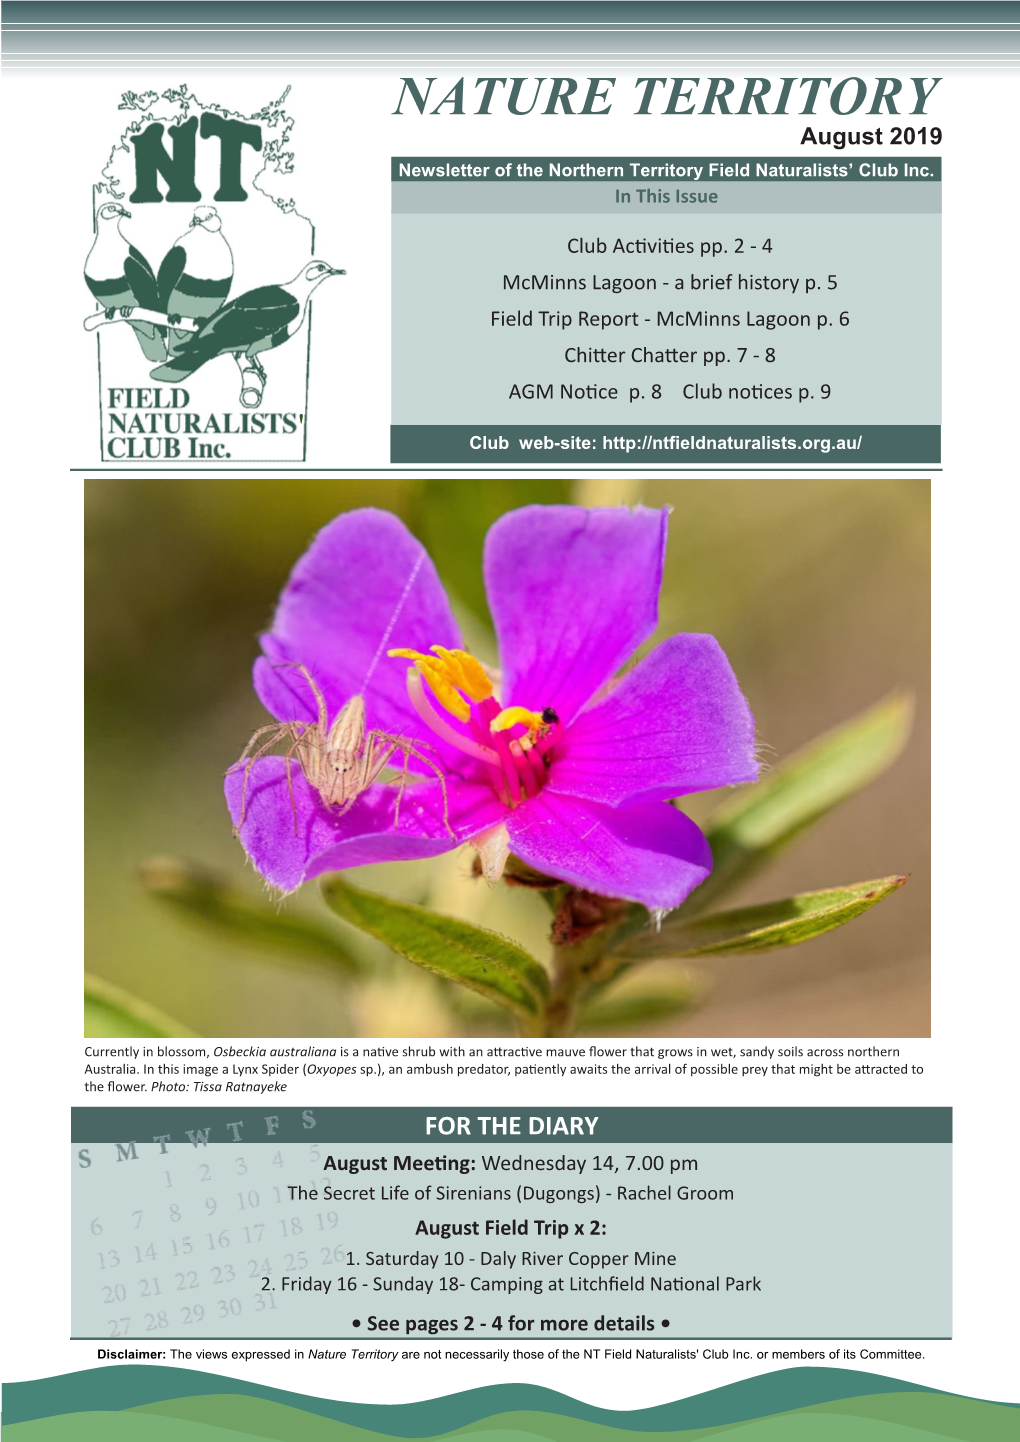 August 2019 Newsletter of the Northern Territory Field Naturalists’ Club Inc